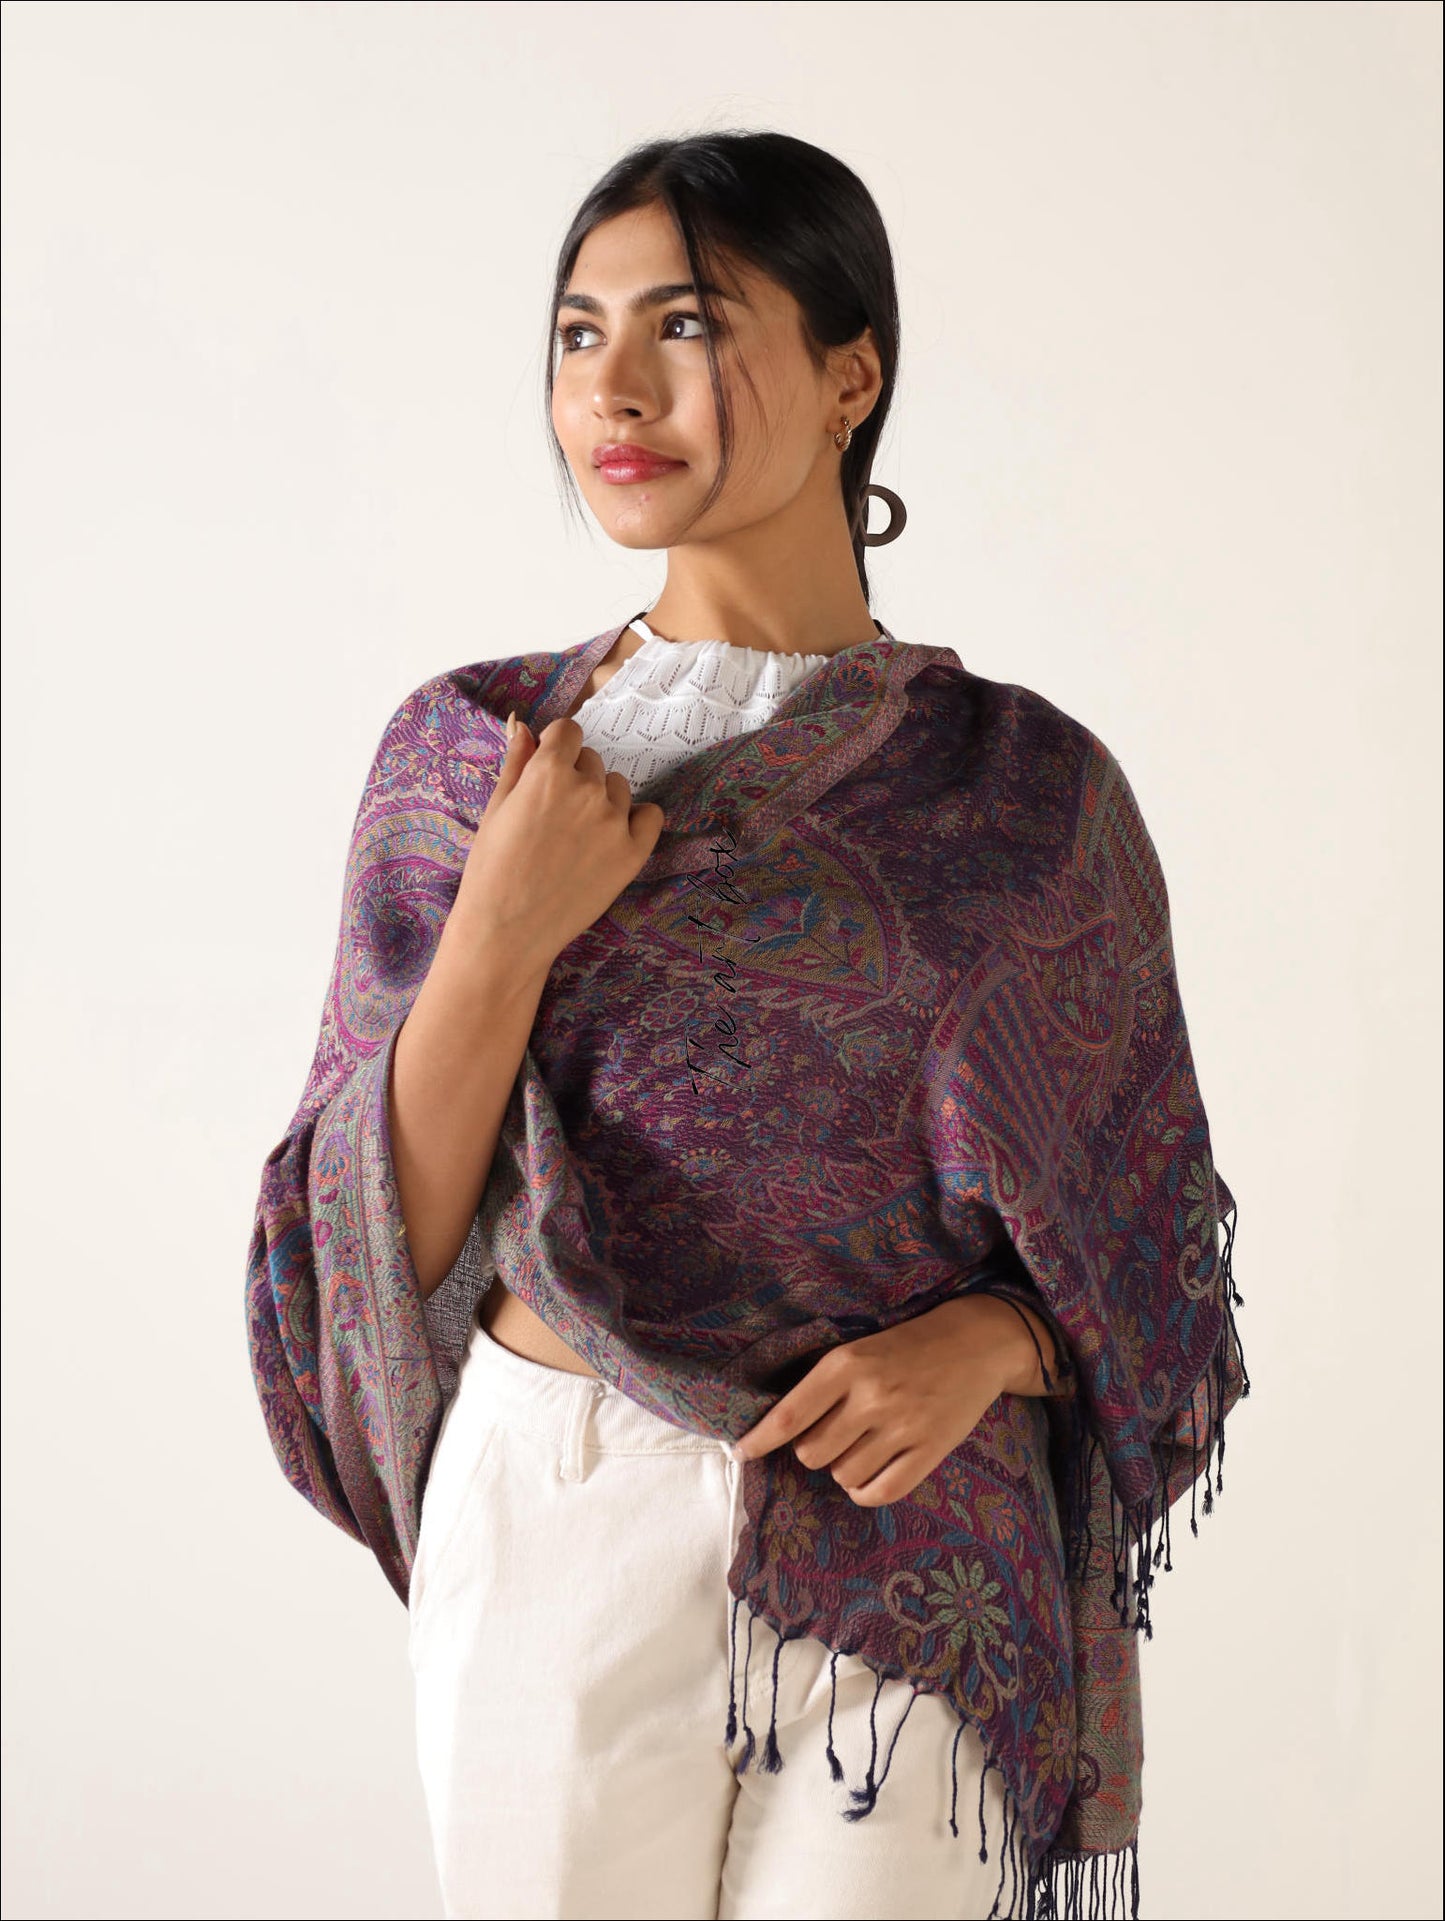 Effortless Elegance: Cashmere Feel Pashmina Scarf for Any Outfit